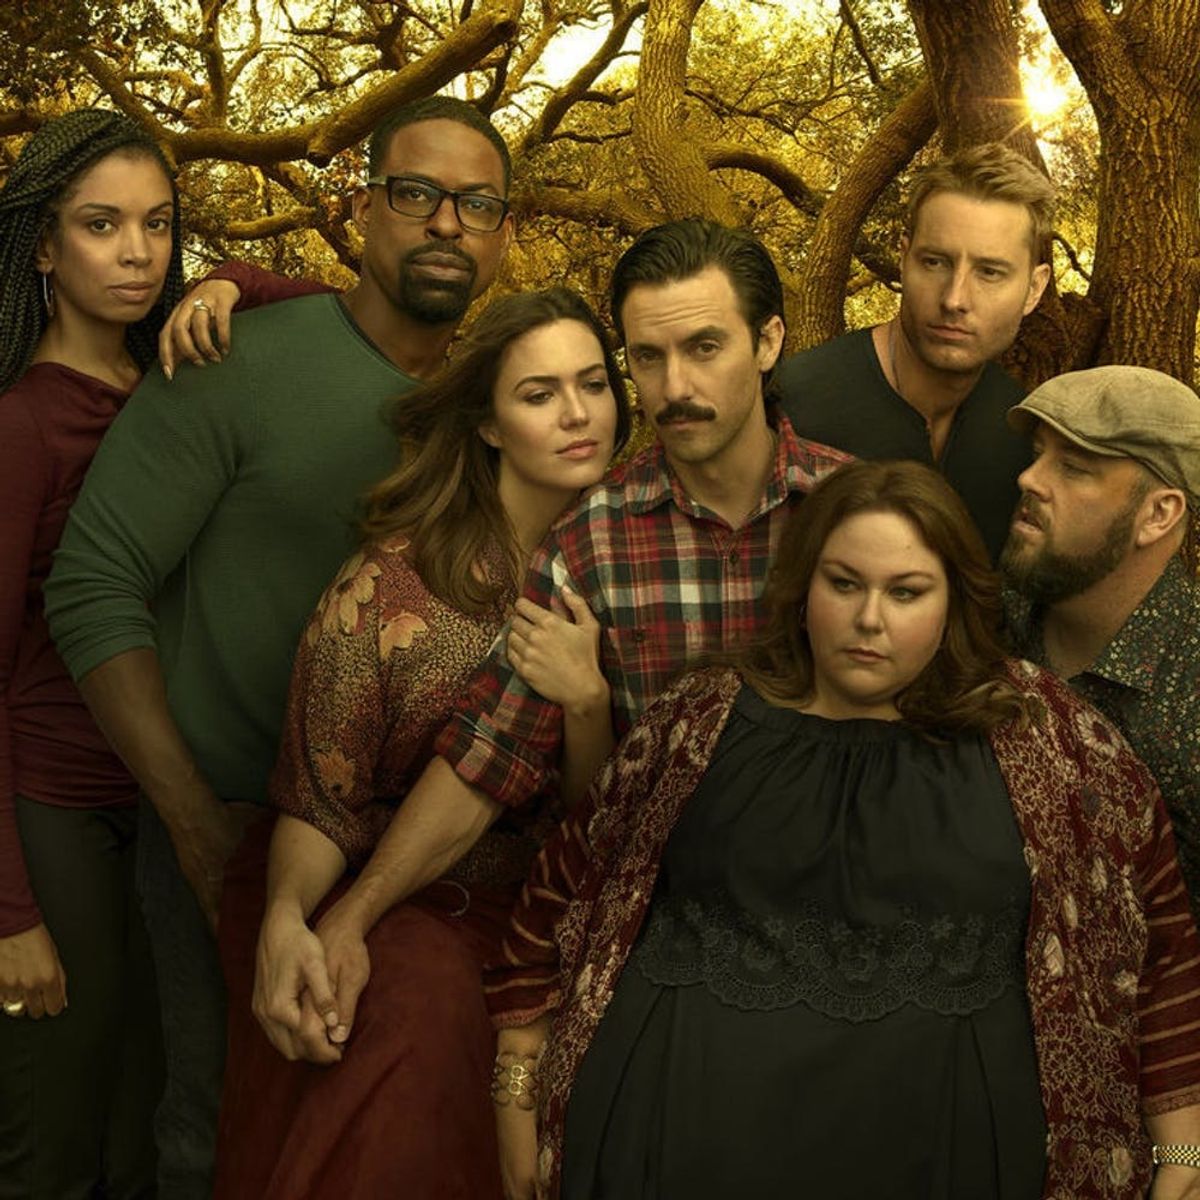 Watch (and Rewatch) the First Footage from ‘This Is Us’ Season 3